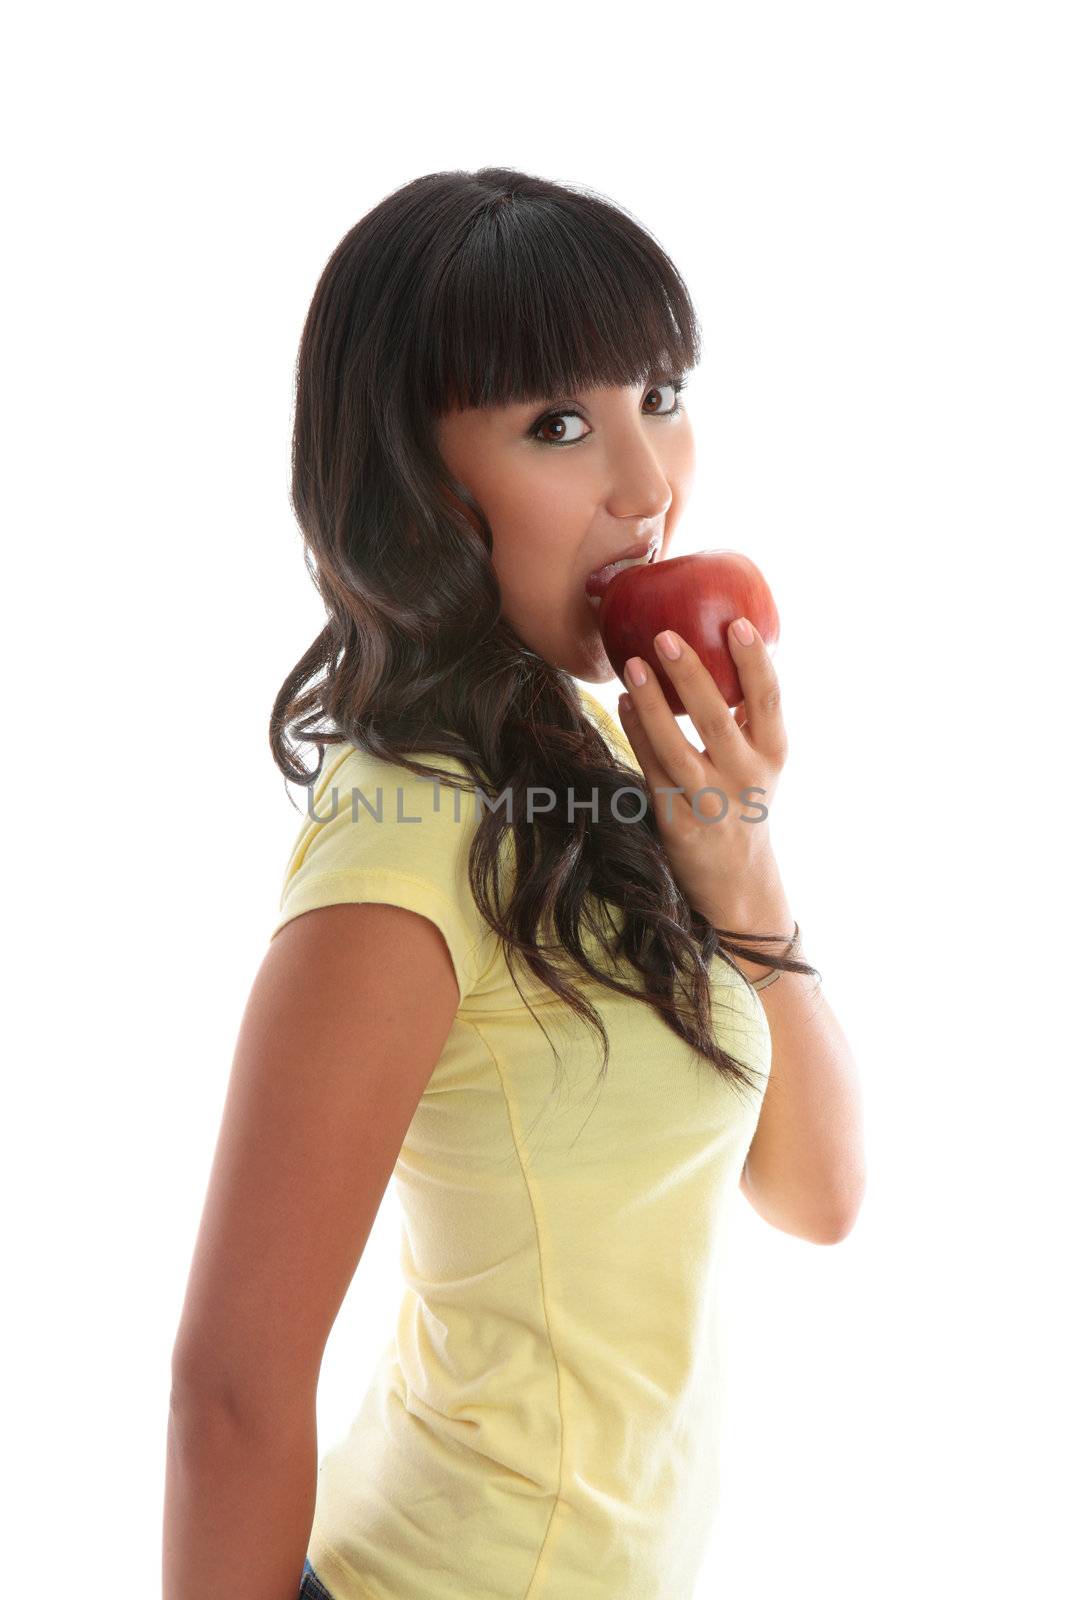 A pretty healthy girl bites into a healthy snack alternative - juicy red apple.